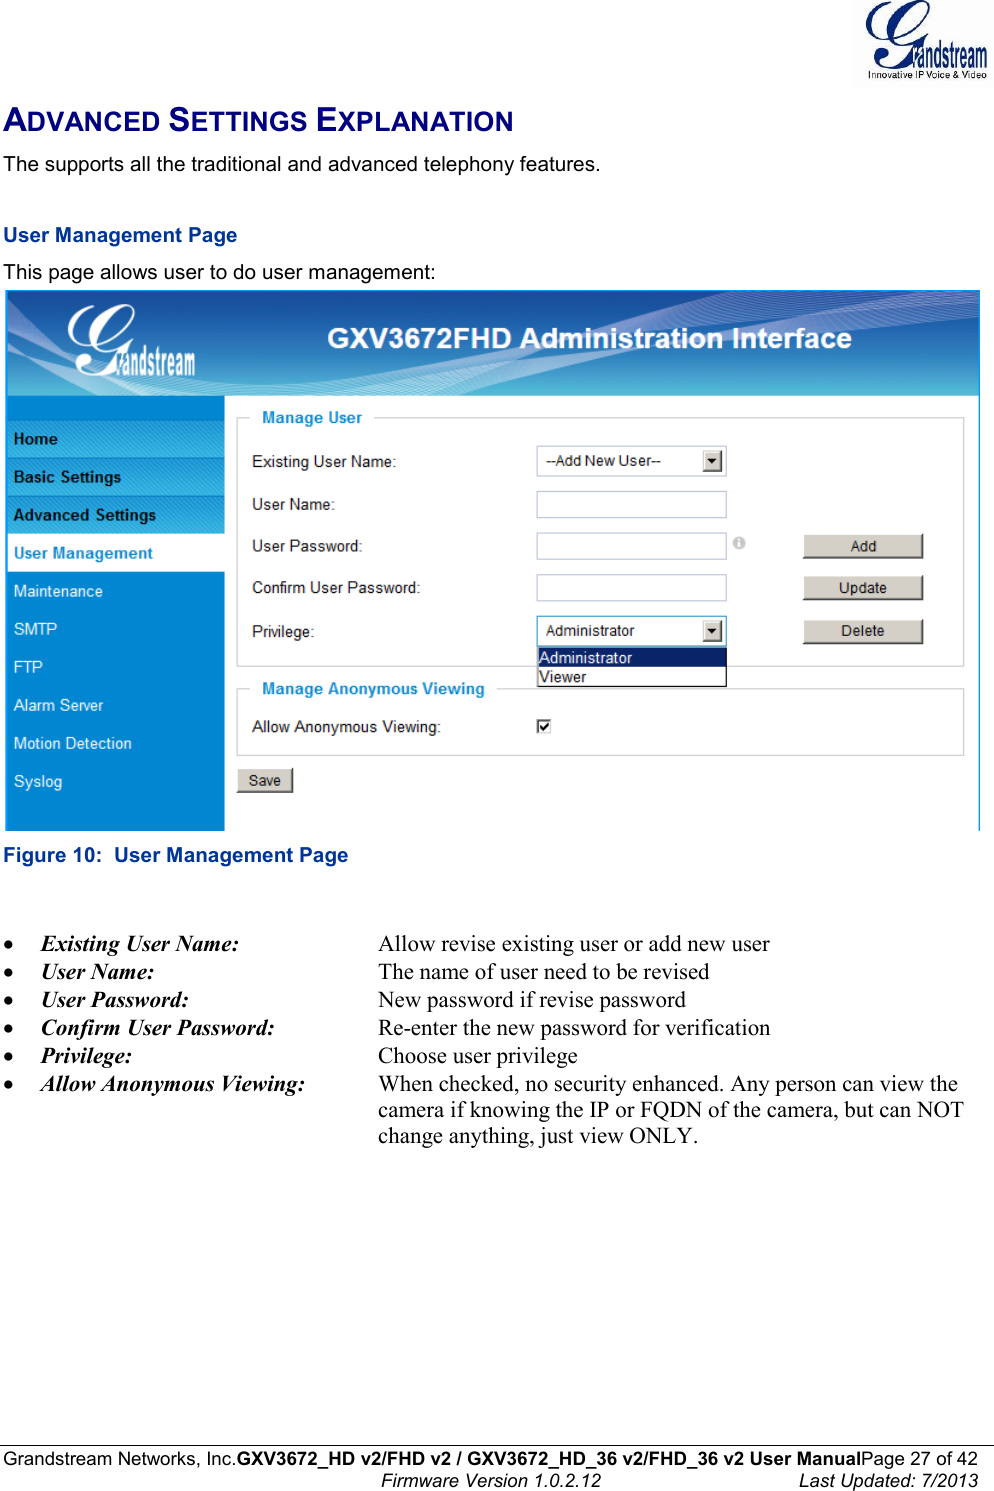  Grandstream Networks, Inc.GXV3672_HD v2/FHD v2 / GXV3672_HD_36 v2/FHD_36 v2 User ManualPage 27 of 42    Firmware Version 1.0.2.12  Last Updated: 7/2013  ADVANCED SETTINGS EXPLANATION The supports all the traditional and advanced telephony features.     User Management Page  This page allows user to do user management:  Figure 10:  User Management Page   Existing User Name:     Allow revise existing user or add new user  User Name:      The name of user need to be revised  User Password:       New password if revise password  Confirm User Password:     Re-enter the new password for verification  Privilege:         Choose user privilege  Allow Anonymous Viewing:  When checked, no security enhanced. Any person can view the            camera if knowing the IP or FQDN of the camera, but can NOT            change anything, just view ONLY.    